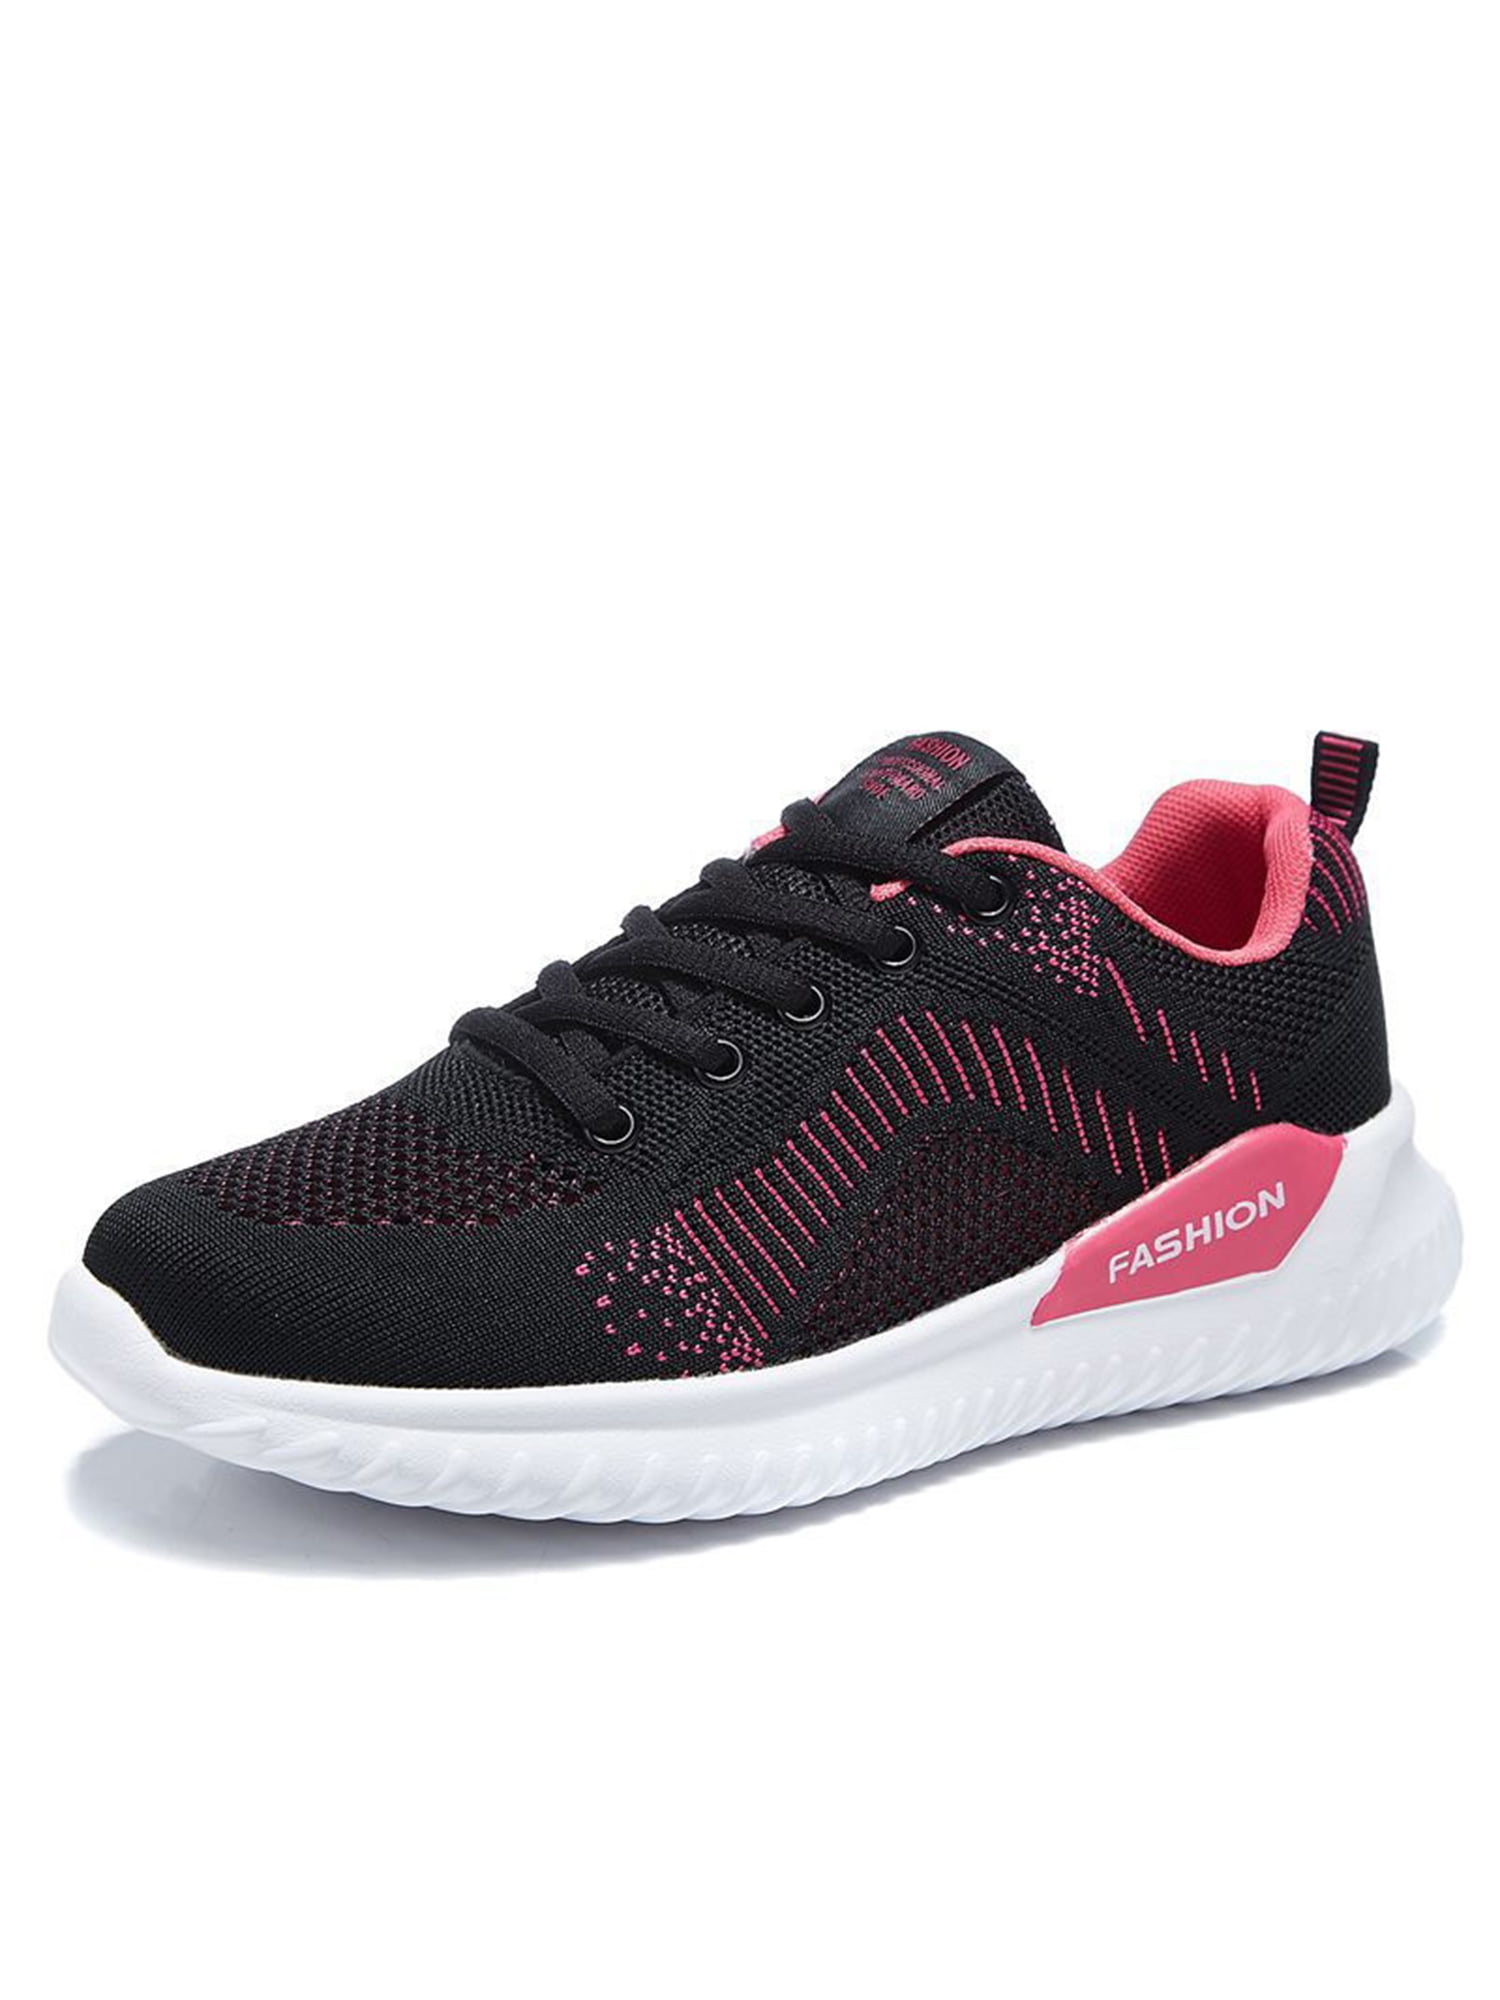 Rockomi Ladies Lightweight Traineres Sport Casual Low Top Shoes Lady ...